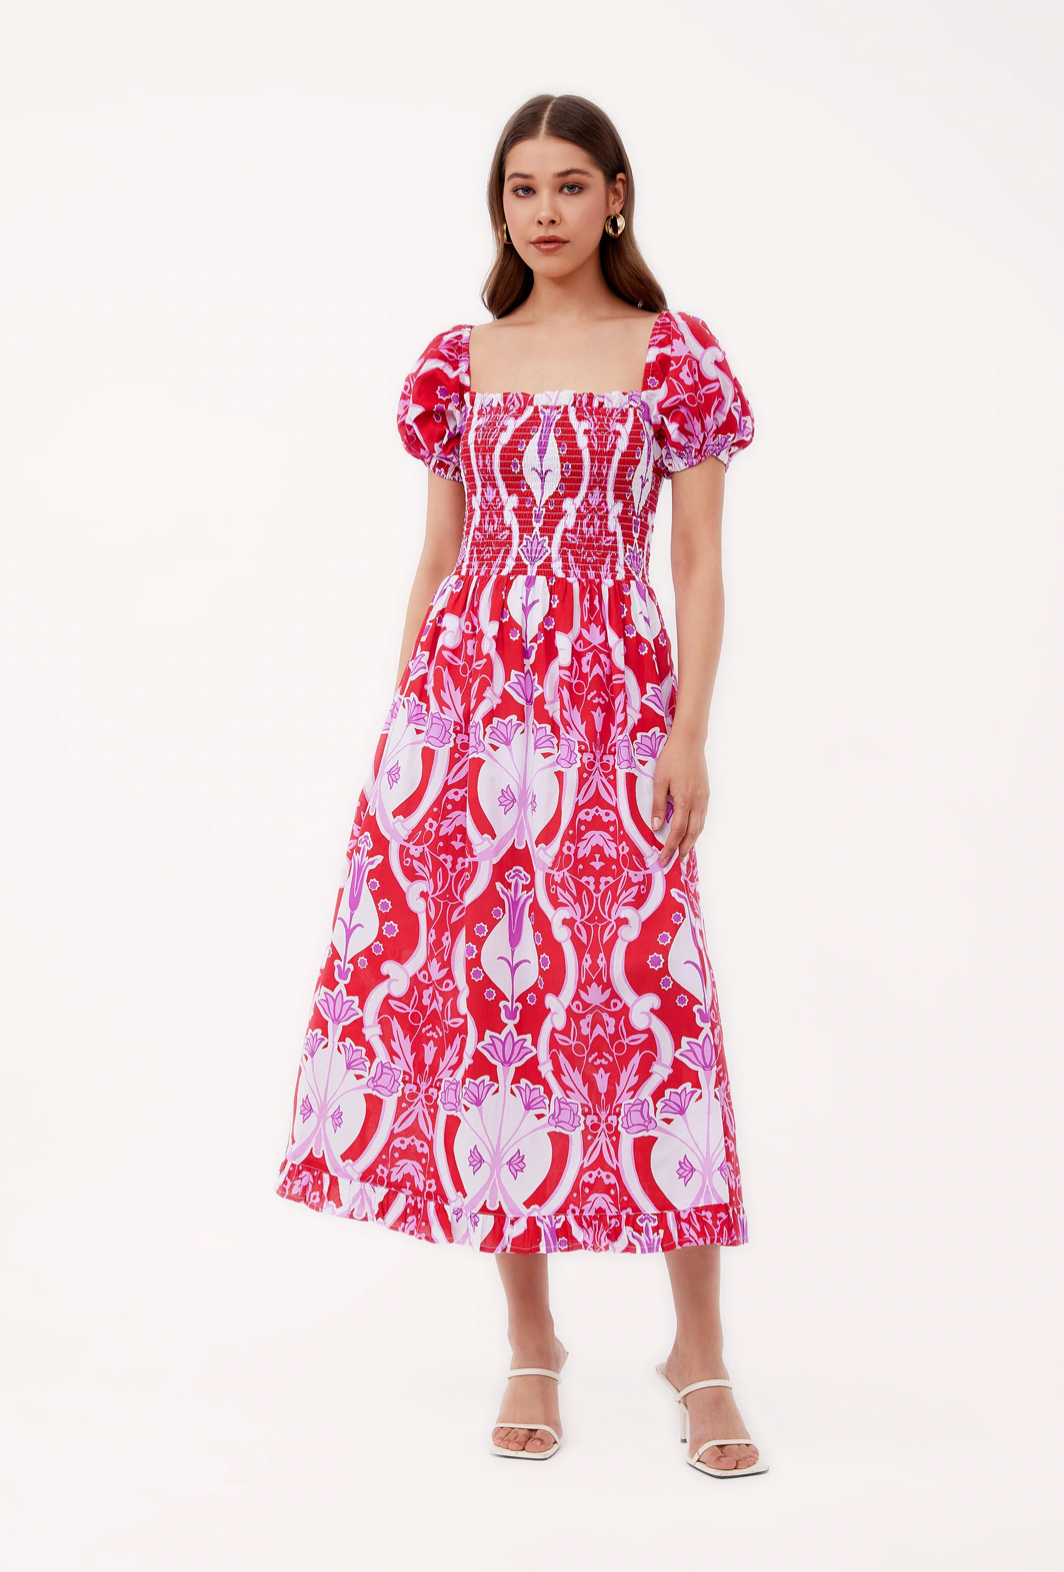 Beyond By Vera Maria Dress in Como Rouge